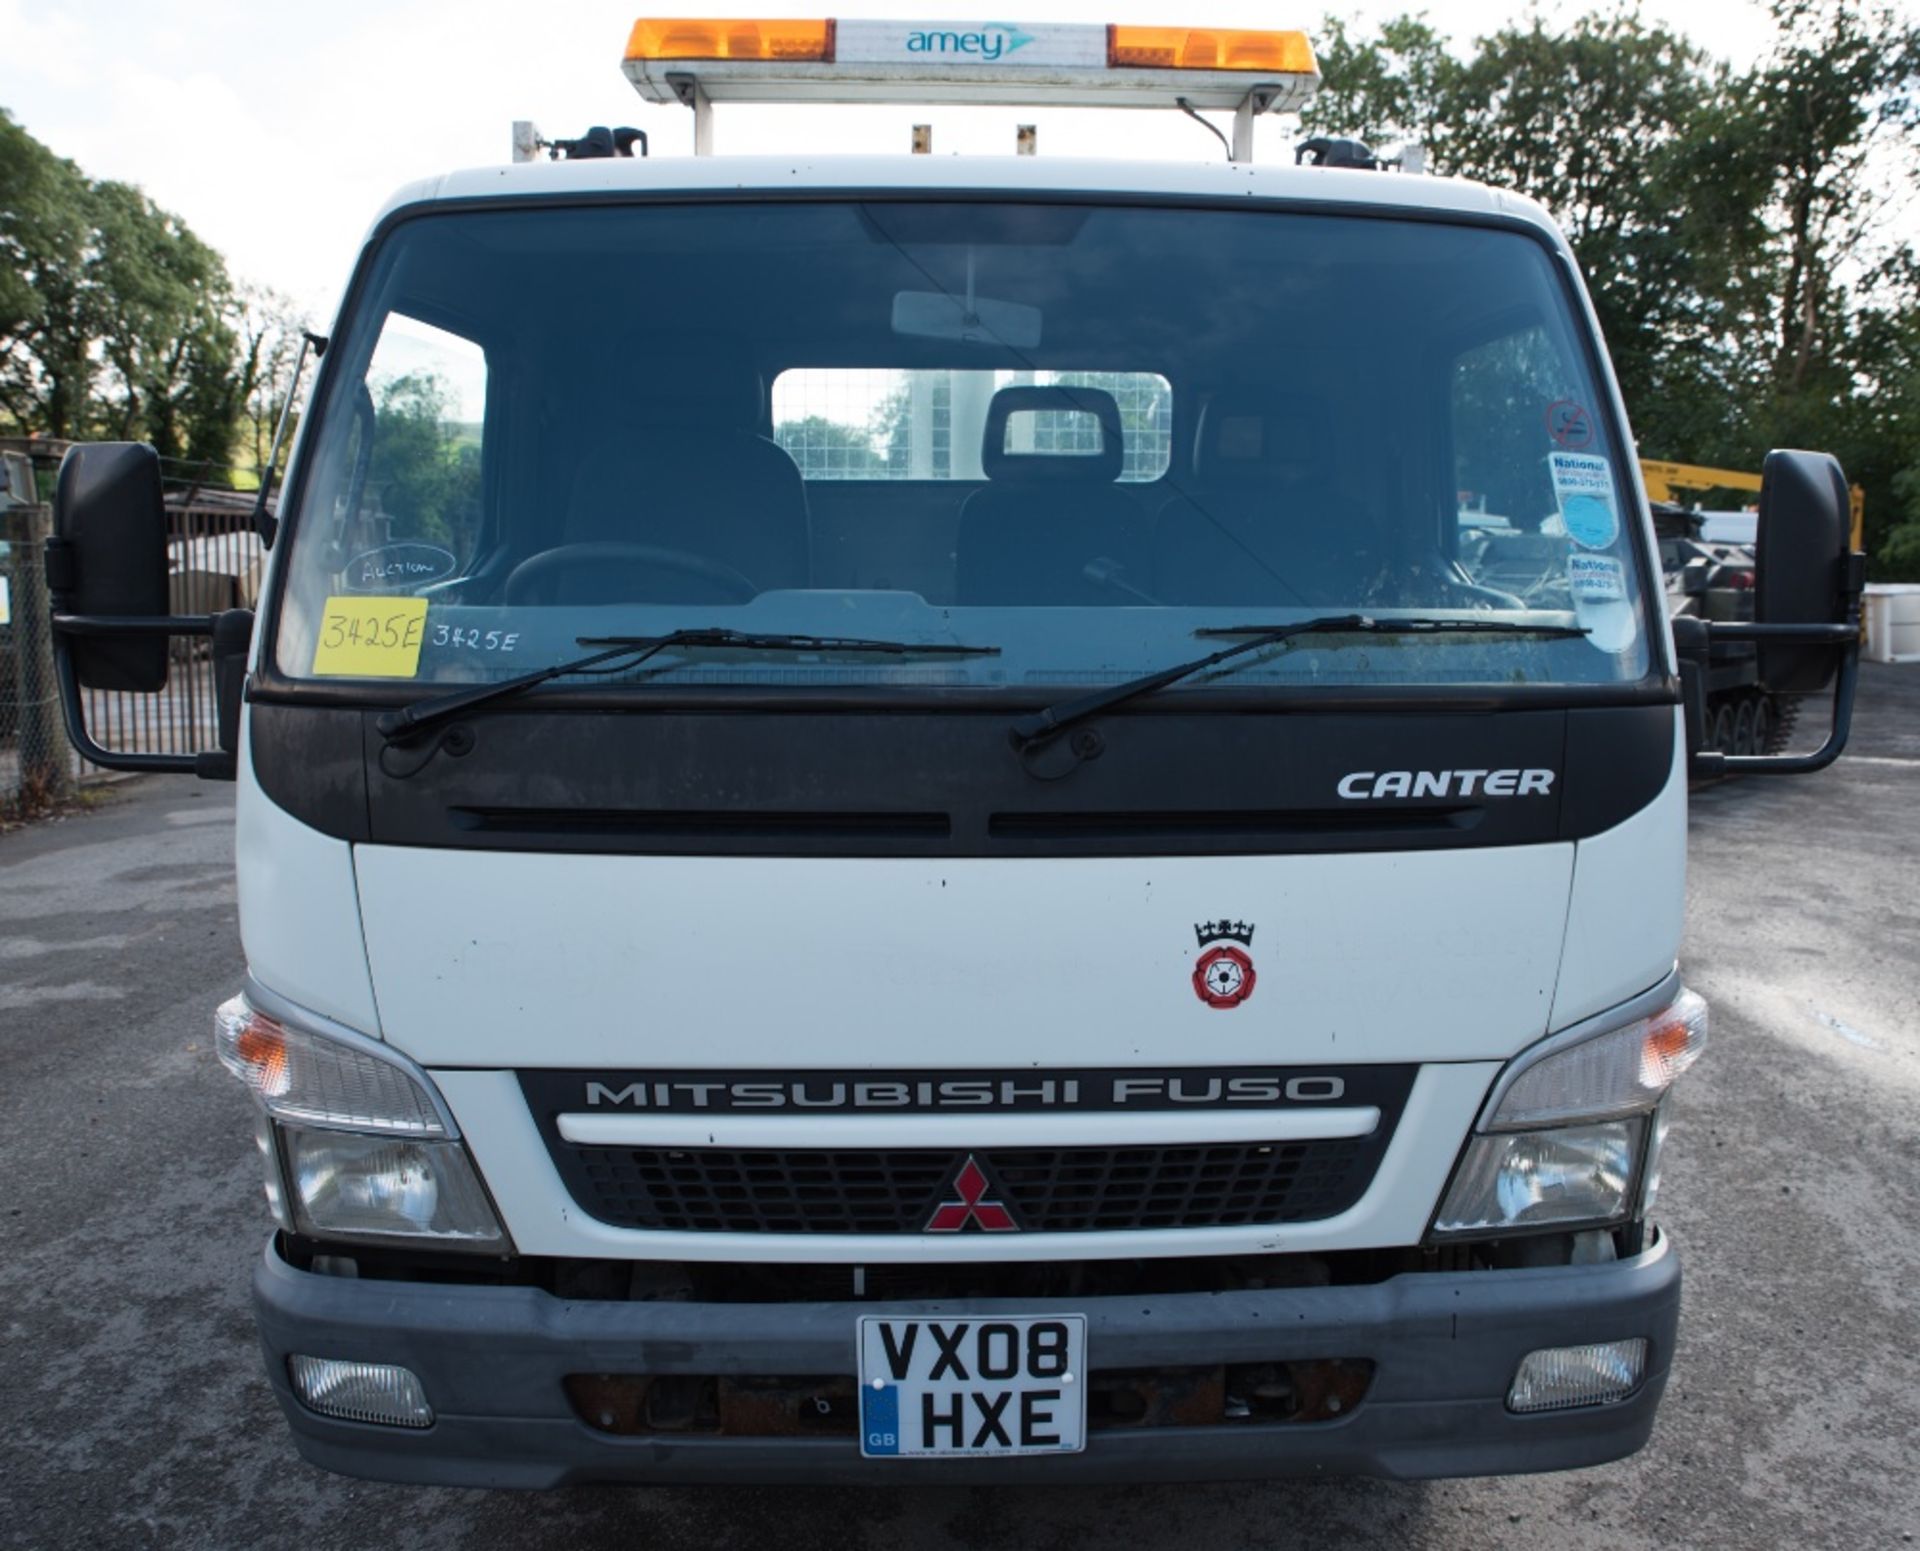 Mitsubishi Fuso 7C18 Canter 7.5 tonne tipper wagon
Registration Number: VX08 HXE
Date of - Image 5 of 7